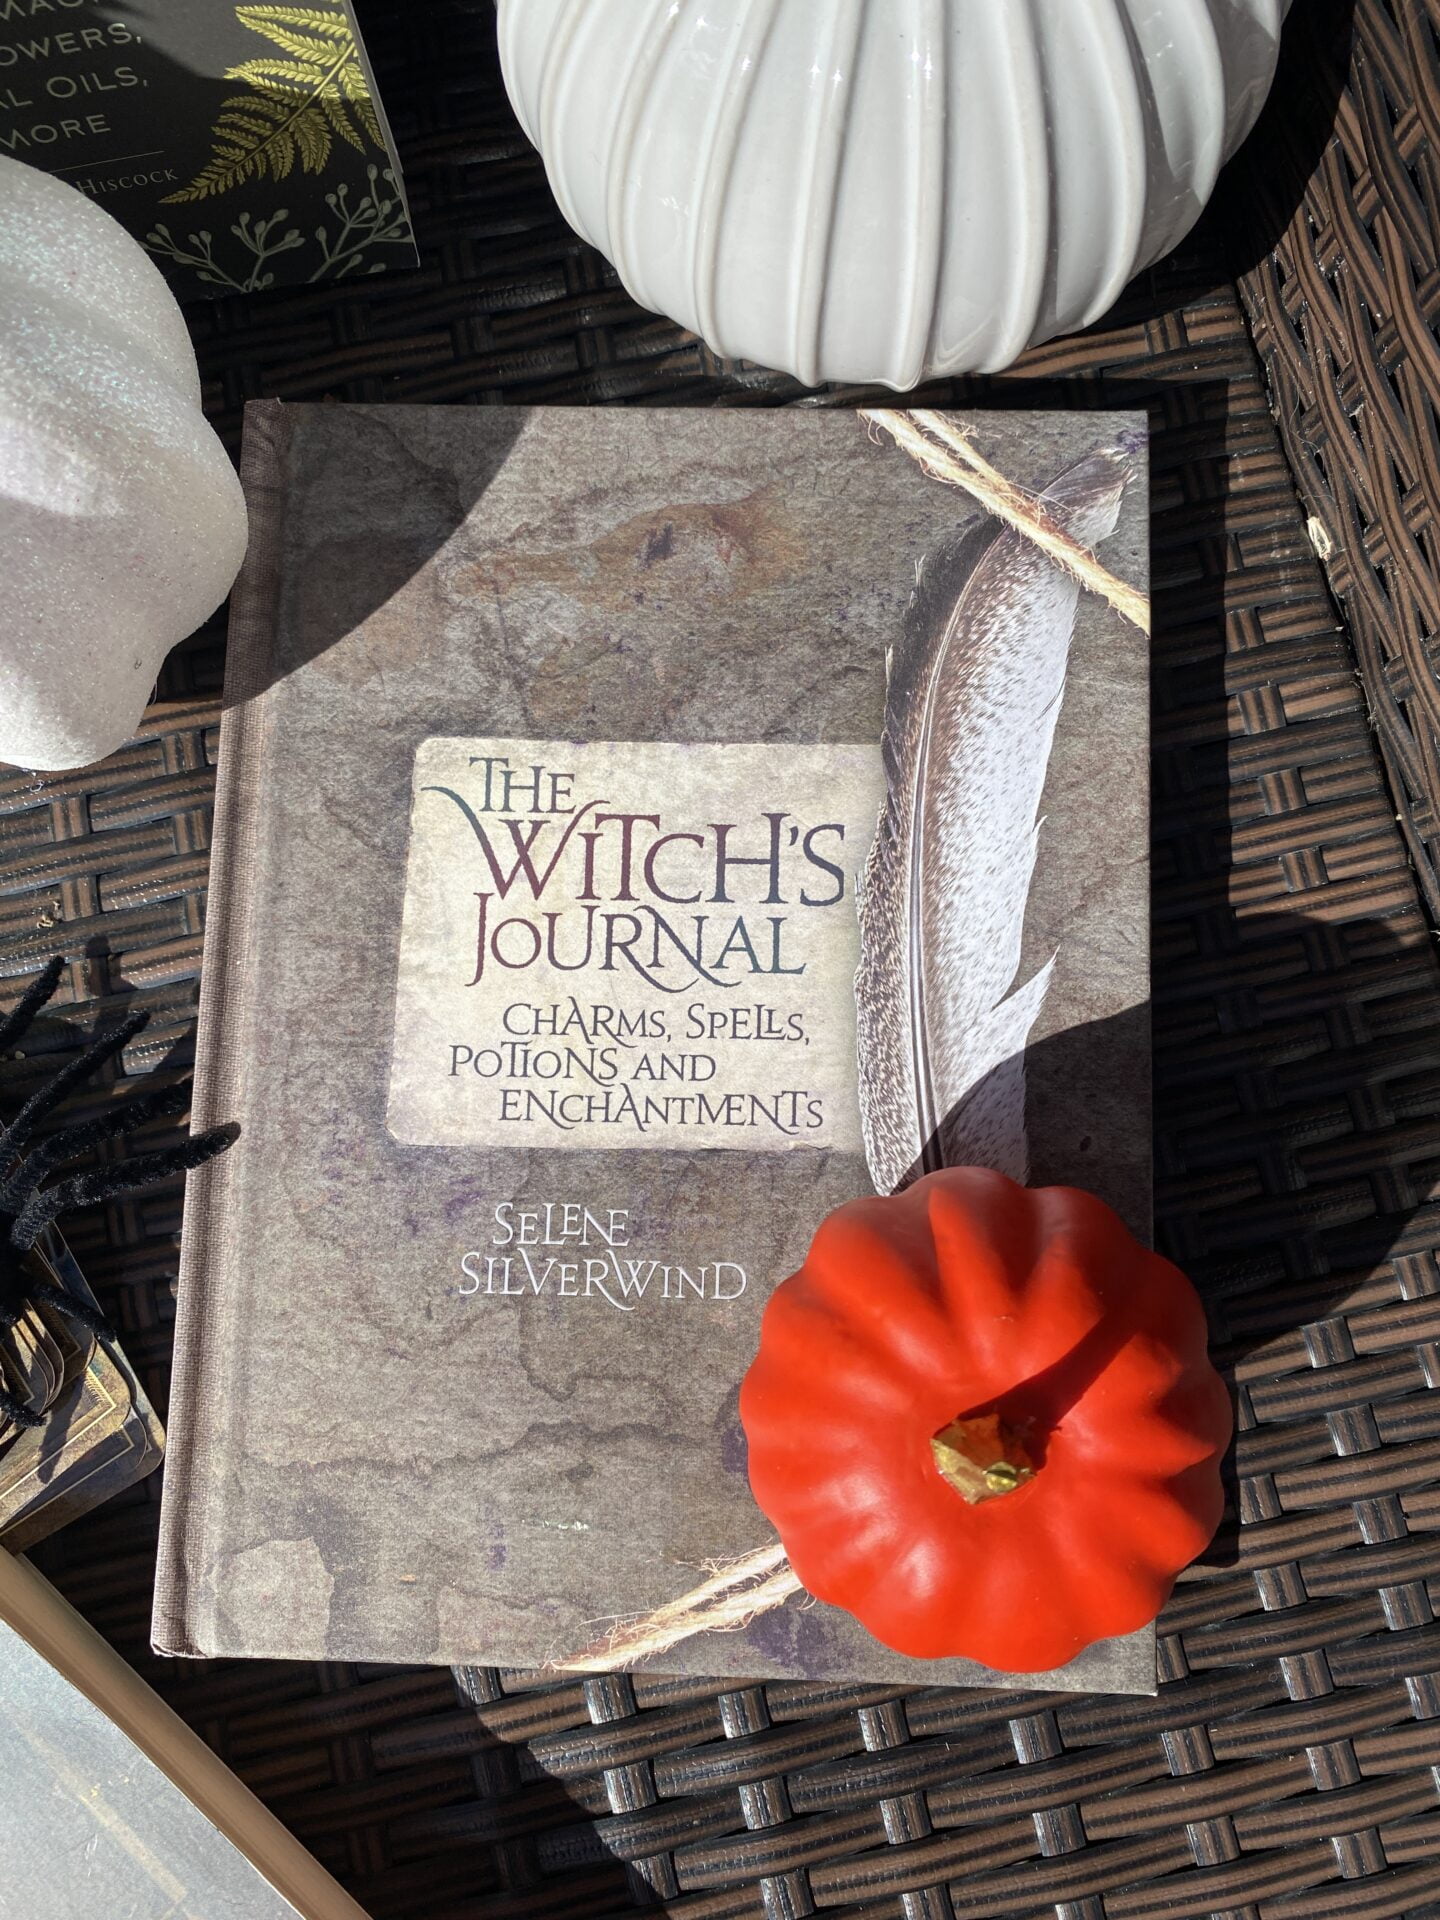 THE WITCH’S JOURNAL BY SELENE SILVERWIND – REVIEW